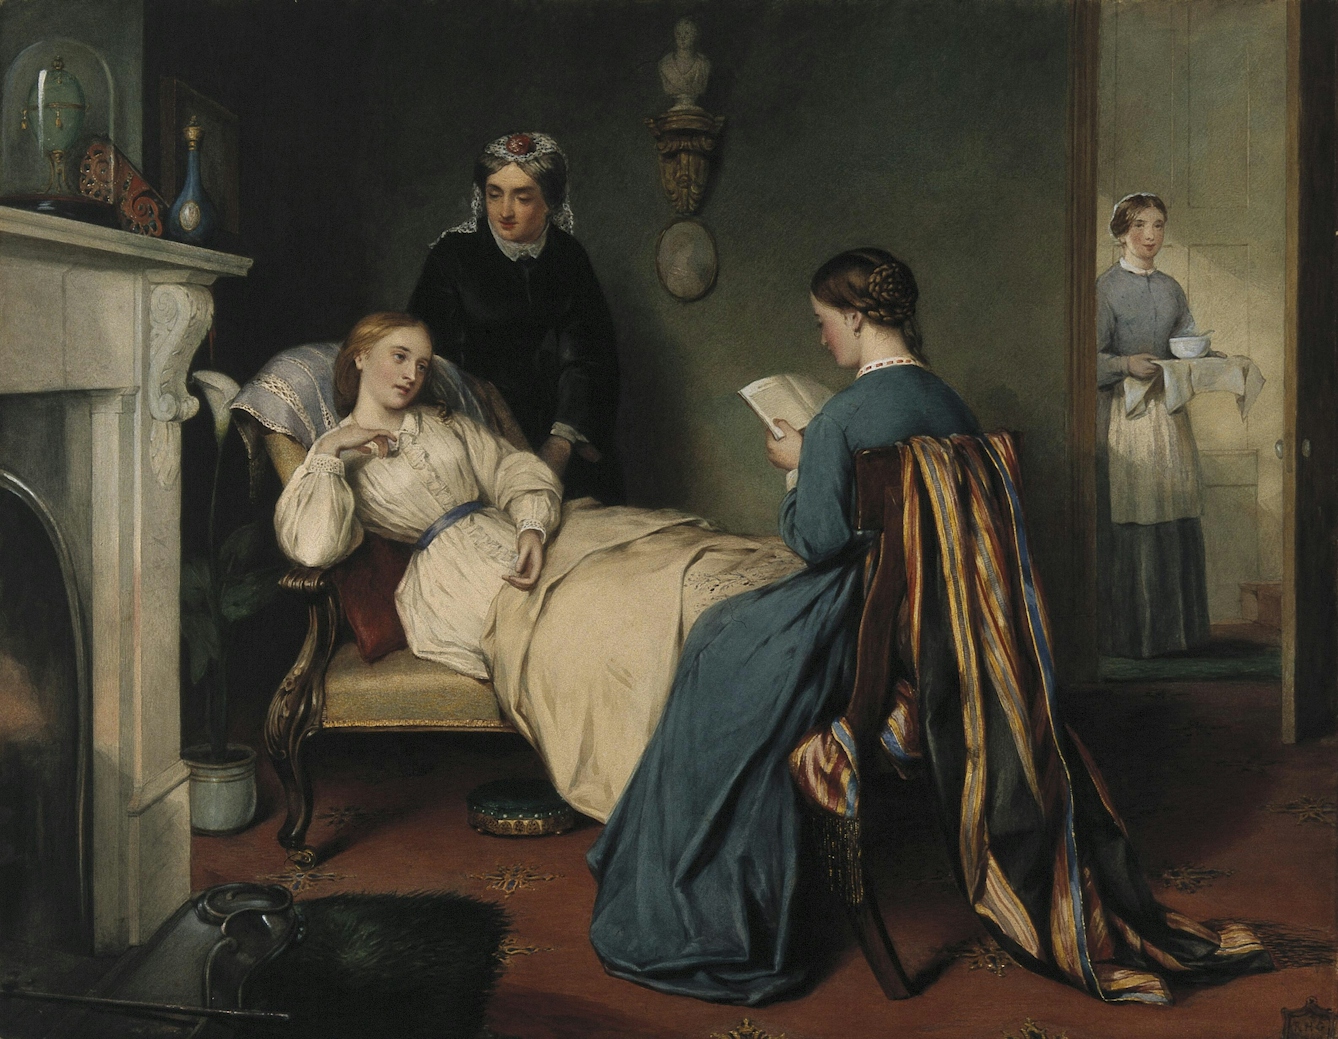 Painting of a 19th century scene of a room in which young woman reclines on a chaise longue by a stone fire palce, while an older woman stands behind, tending to her. Another young woman with her back to the viewer sits on a chair reading to the convalescent. An older woman stands behind the chaise tending to the convalescent. A maid stands in the open doorway carrying a steaming bowl of soup on a tray.